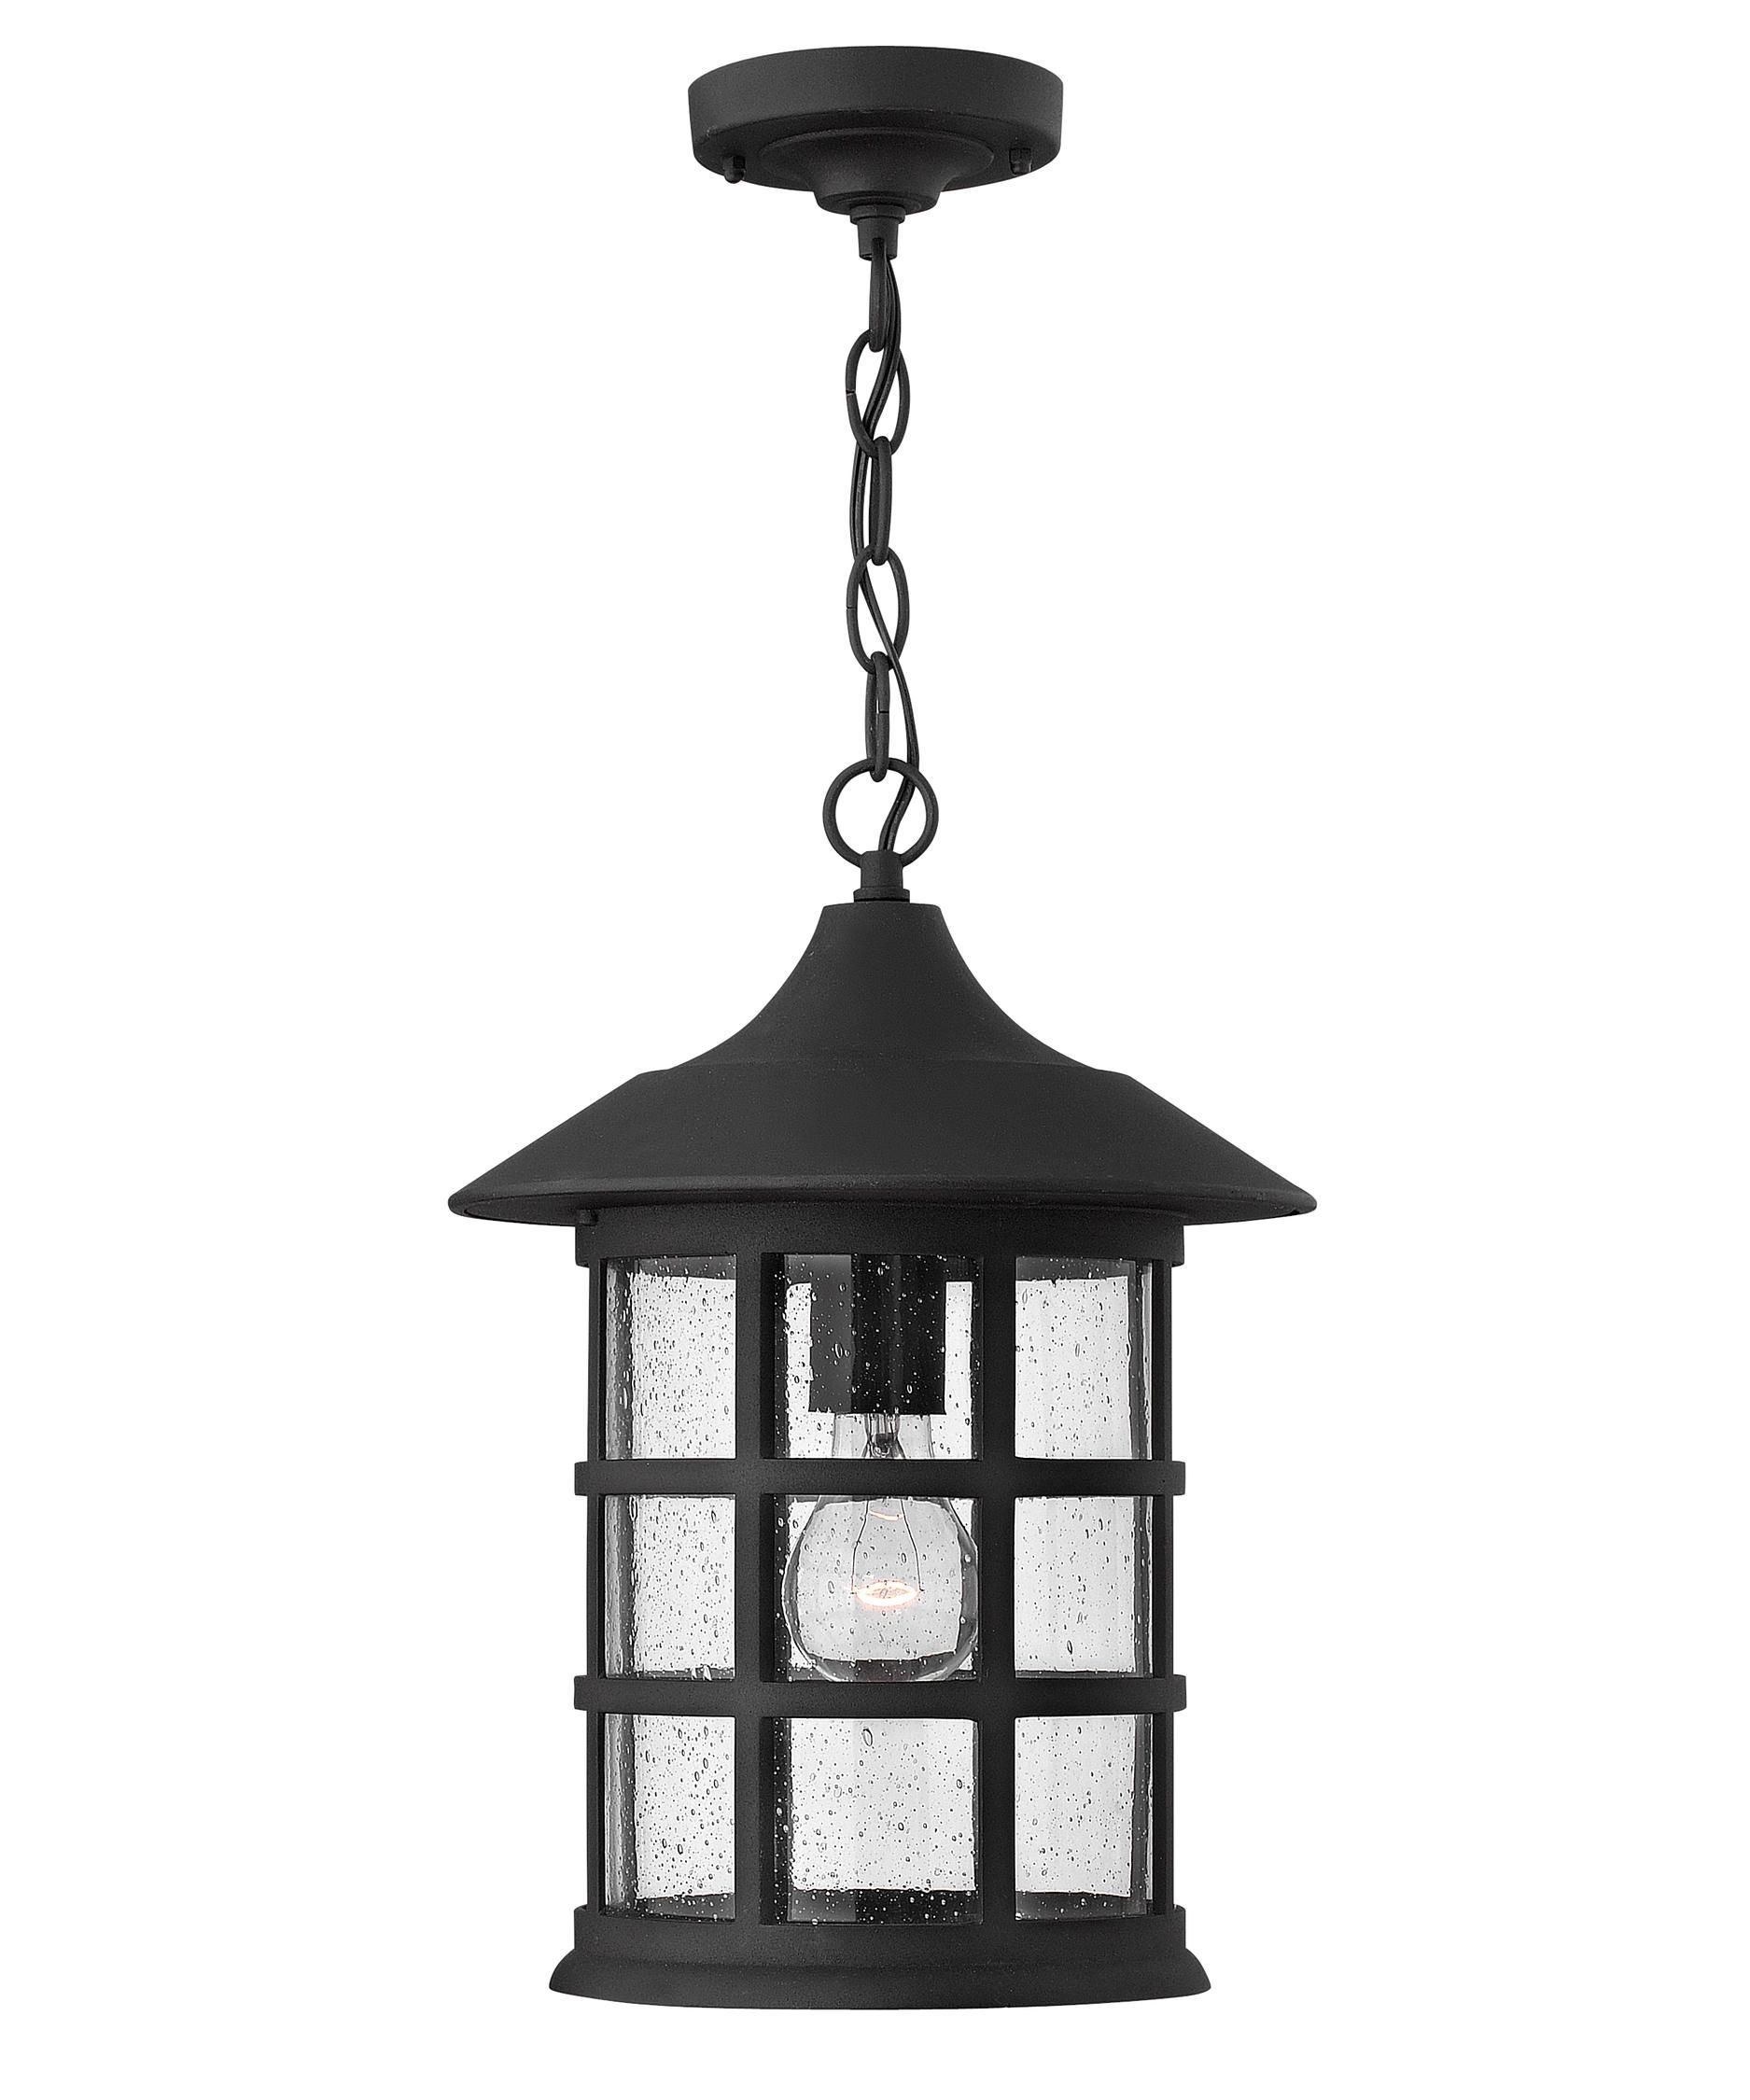 Hinkley Lighting 1802 Freeport 10 Inch Wide 1 Light Outdoor Hanging For Contemporary Hanging Porch Hinkley Lighting (View 5 of 15)